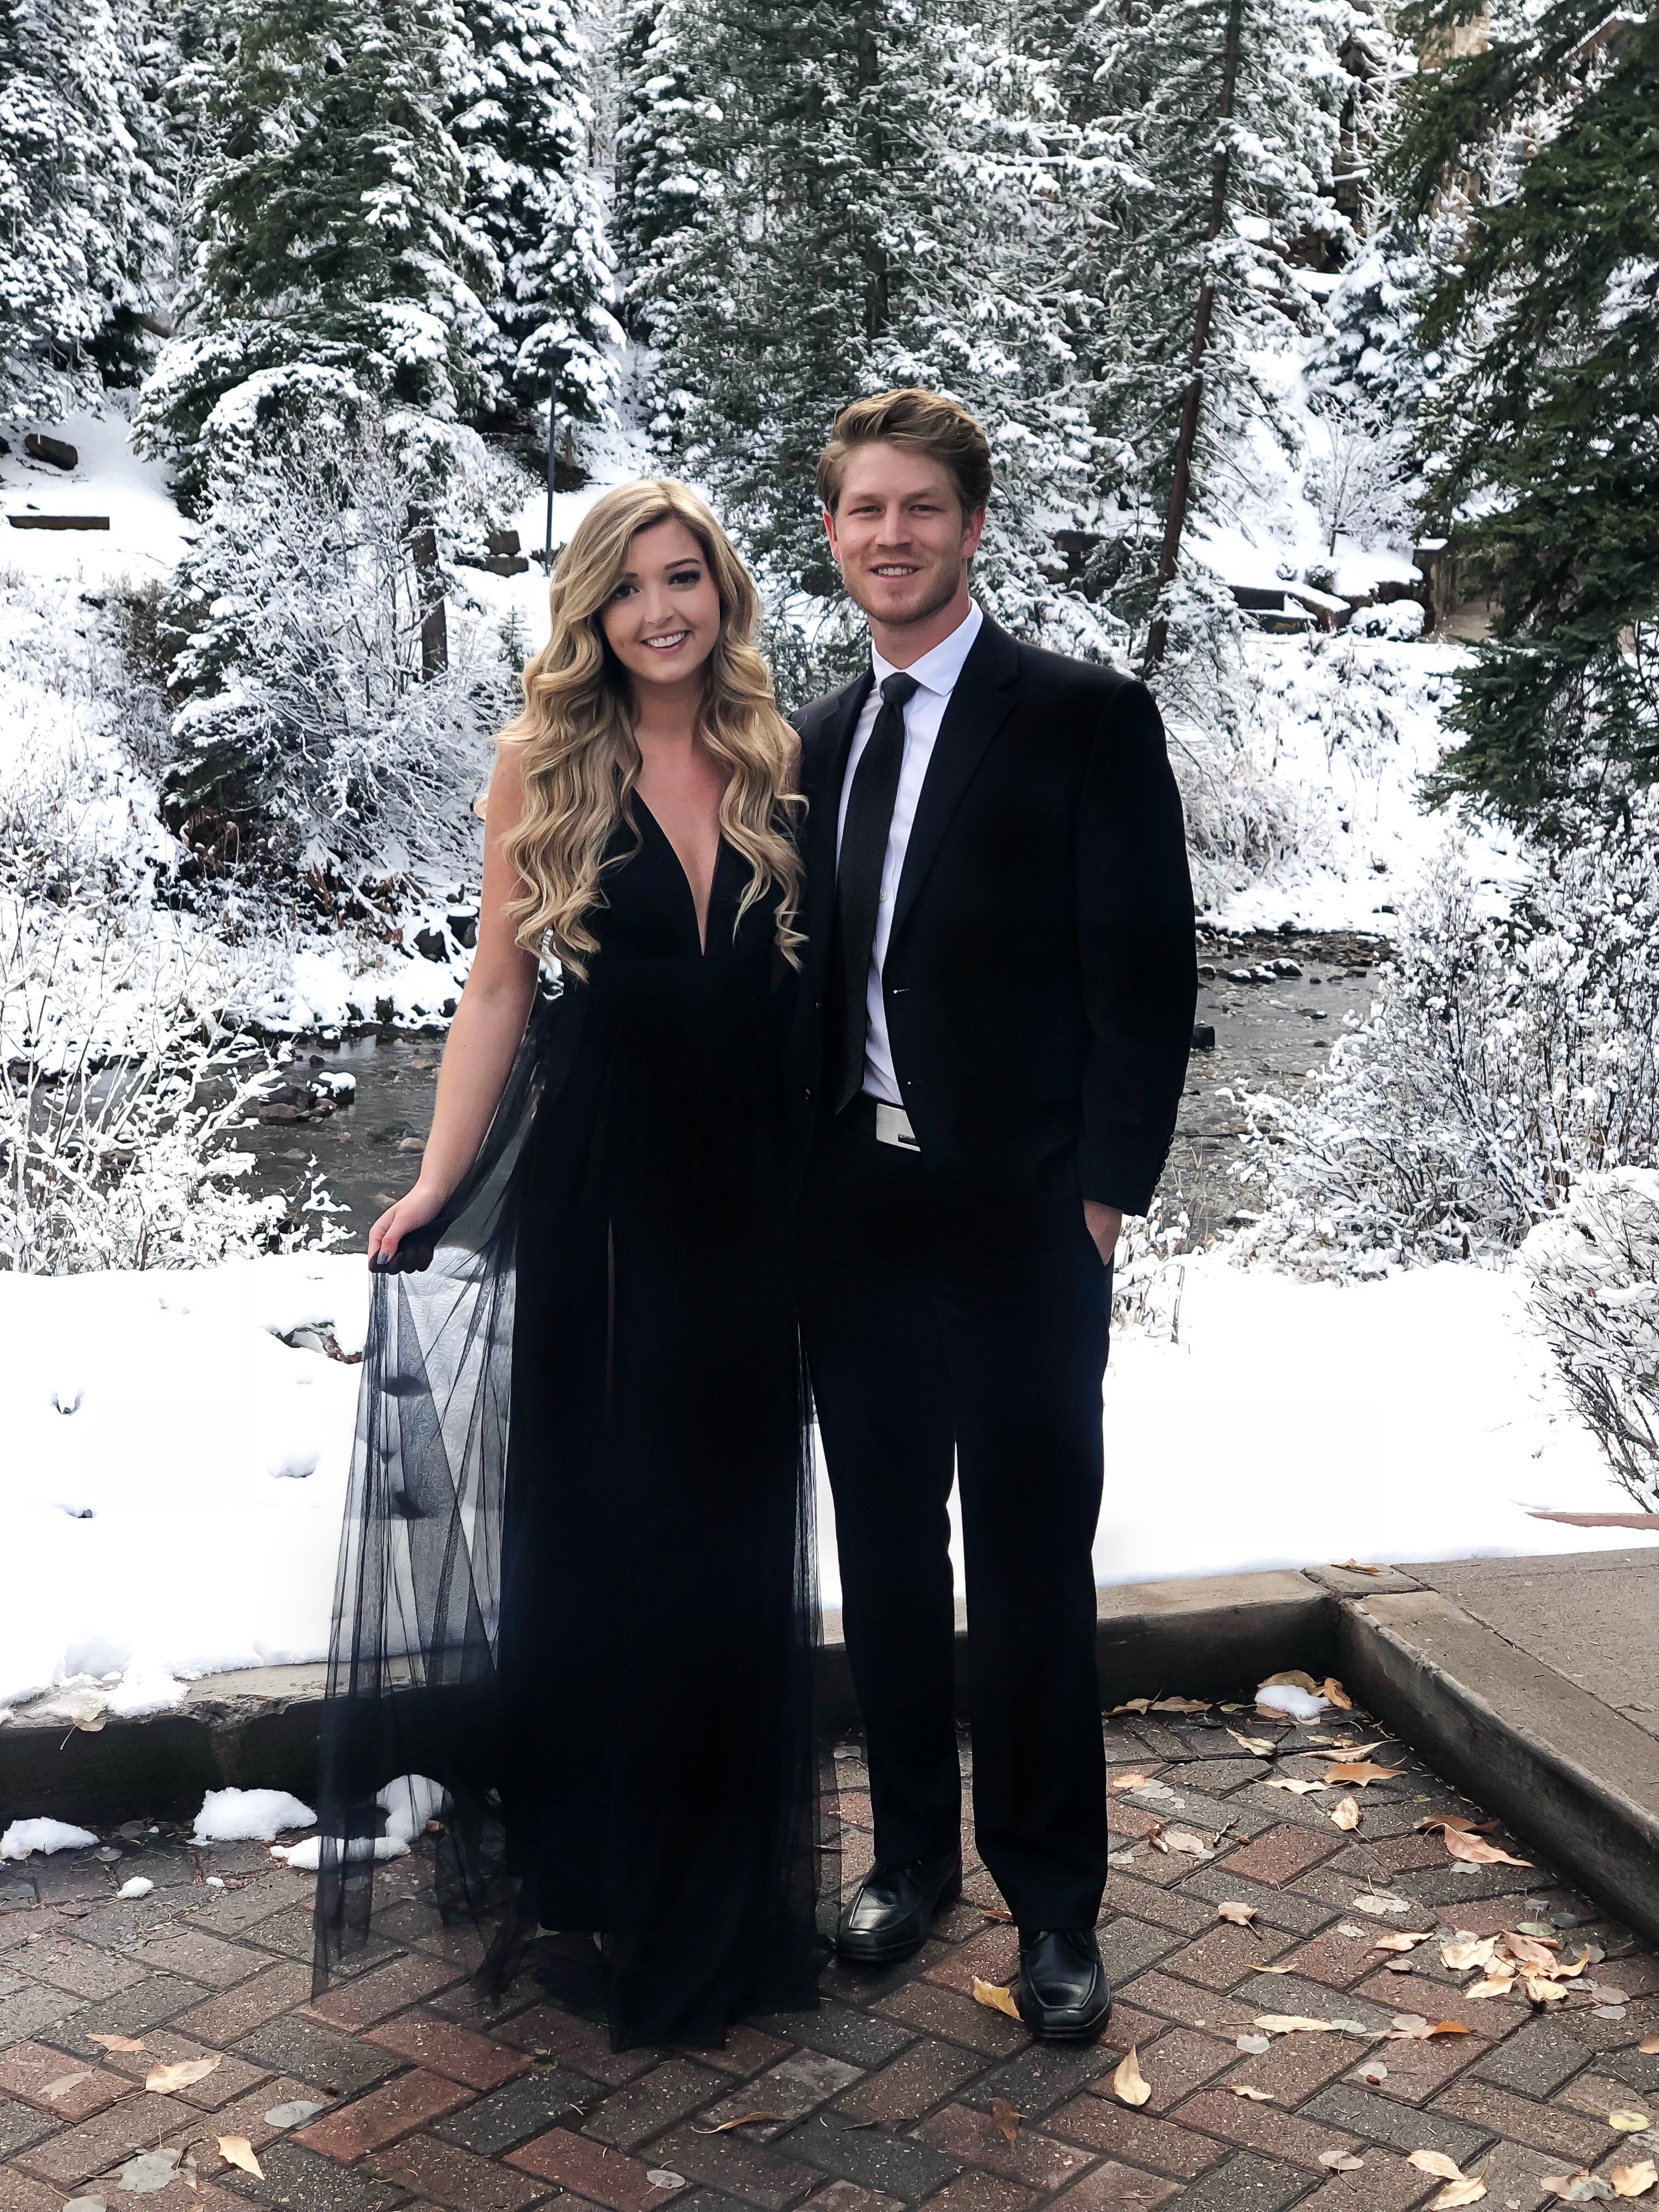 What I wore in Vail! Went to Vail, Colorado last weekend for a wedding so I wanted to share my everyday Colorado outfits and my wedding arrive! We went in November and it was beautiful and snowy! Details on fashion blog daily dos of charm by lauren lindmark